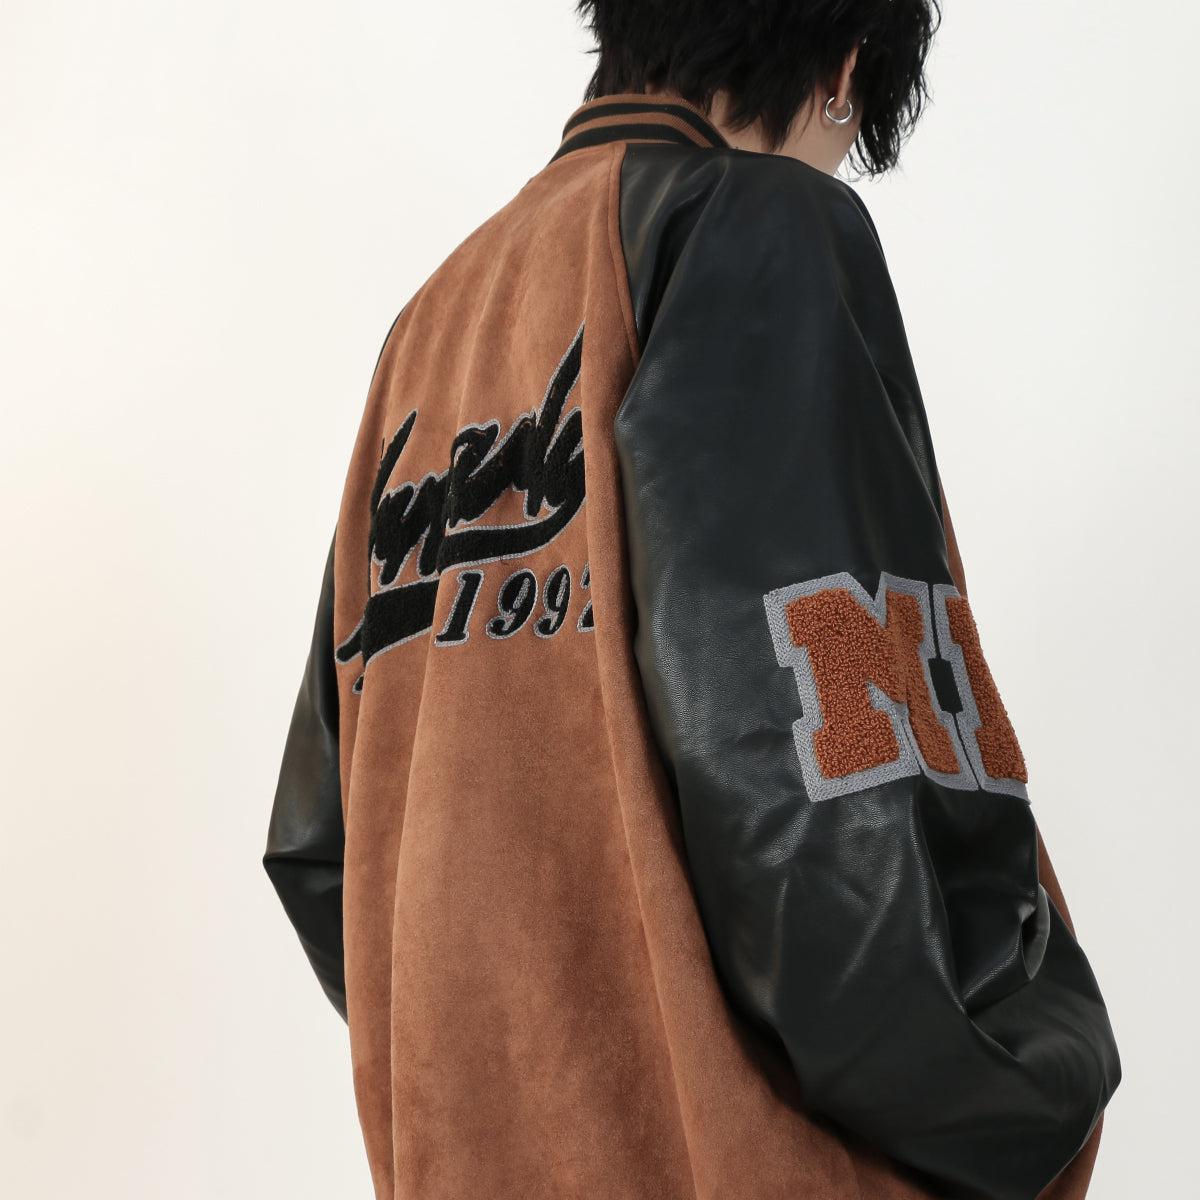 Vintage Faux Leather Arms Jacket Korean Street Fashion Jacket By Mr Nearly Shop Online at OH Vault